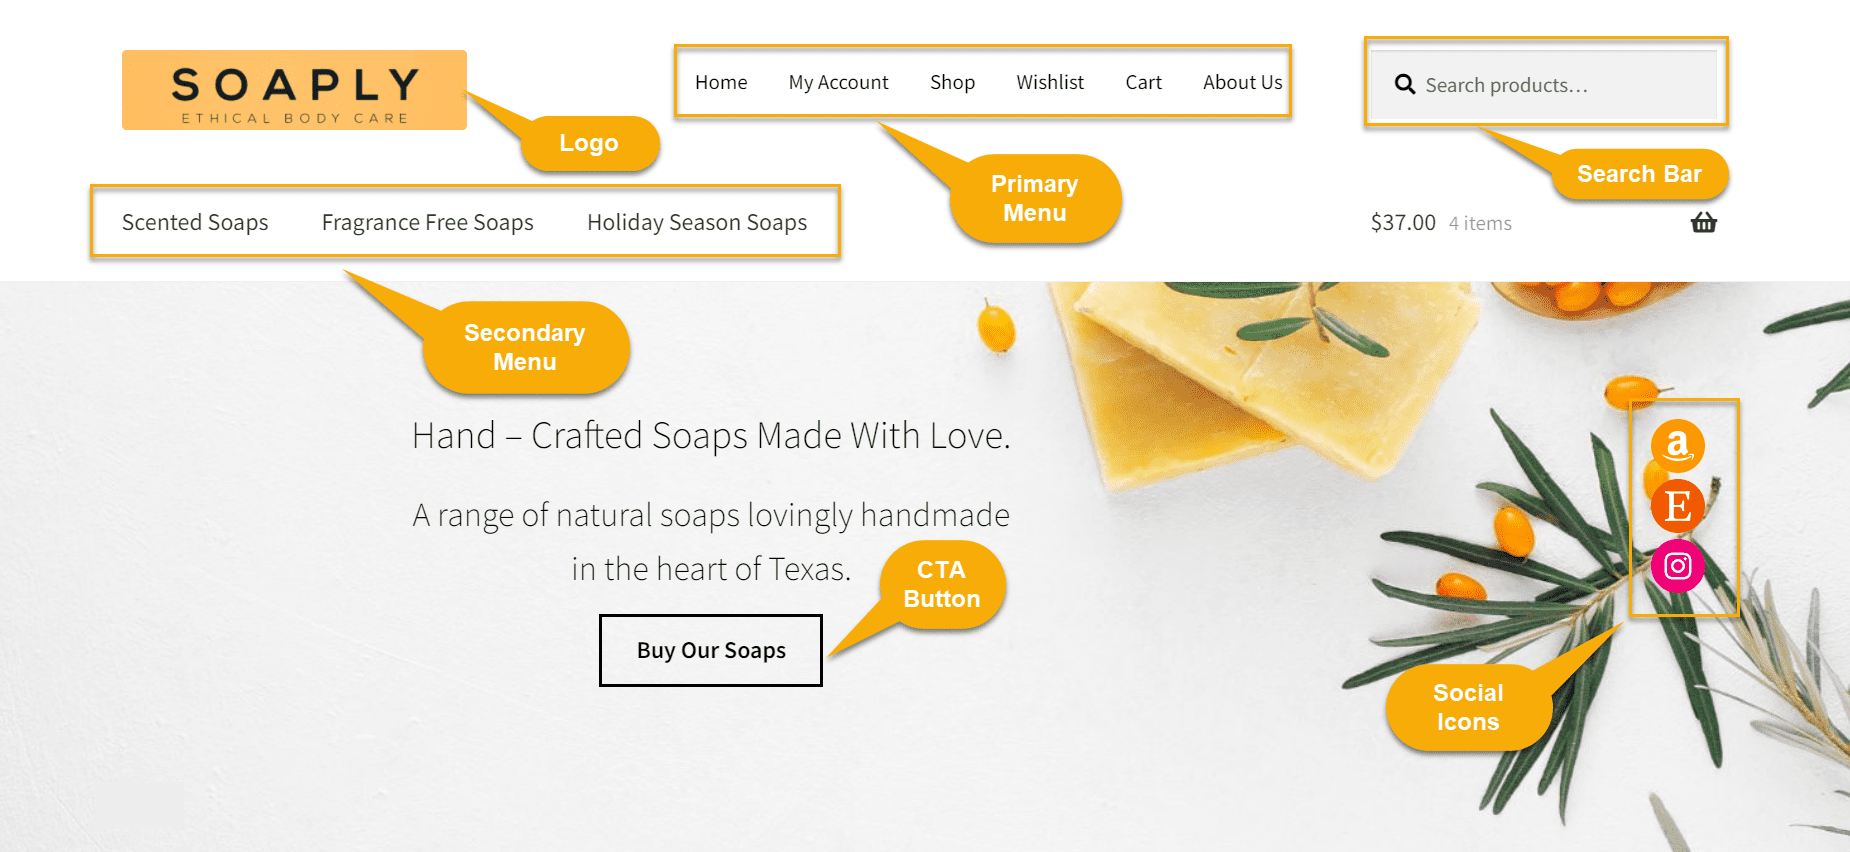 soaply homepage elements